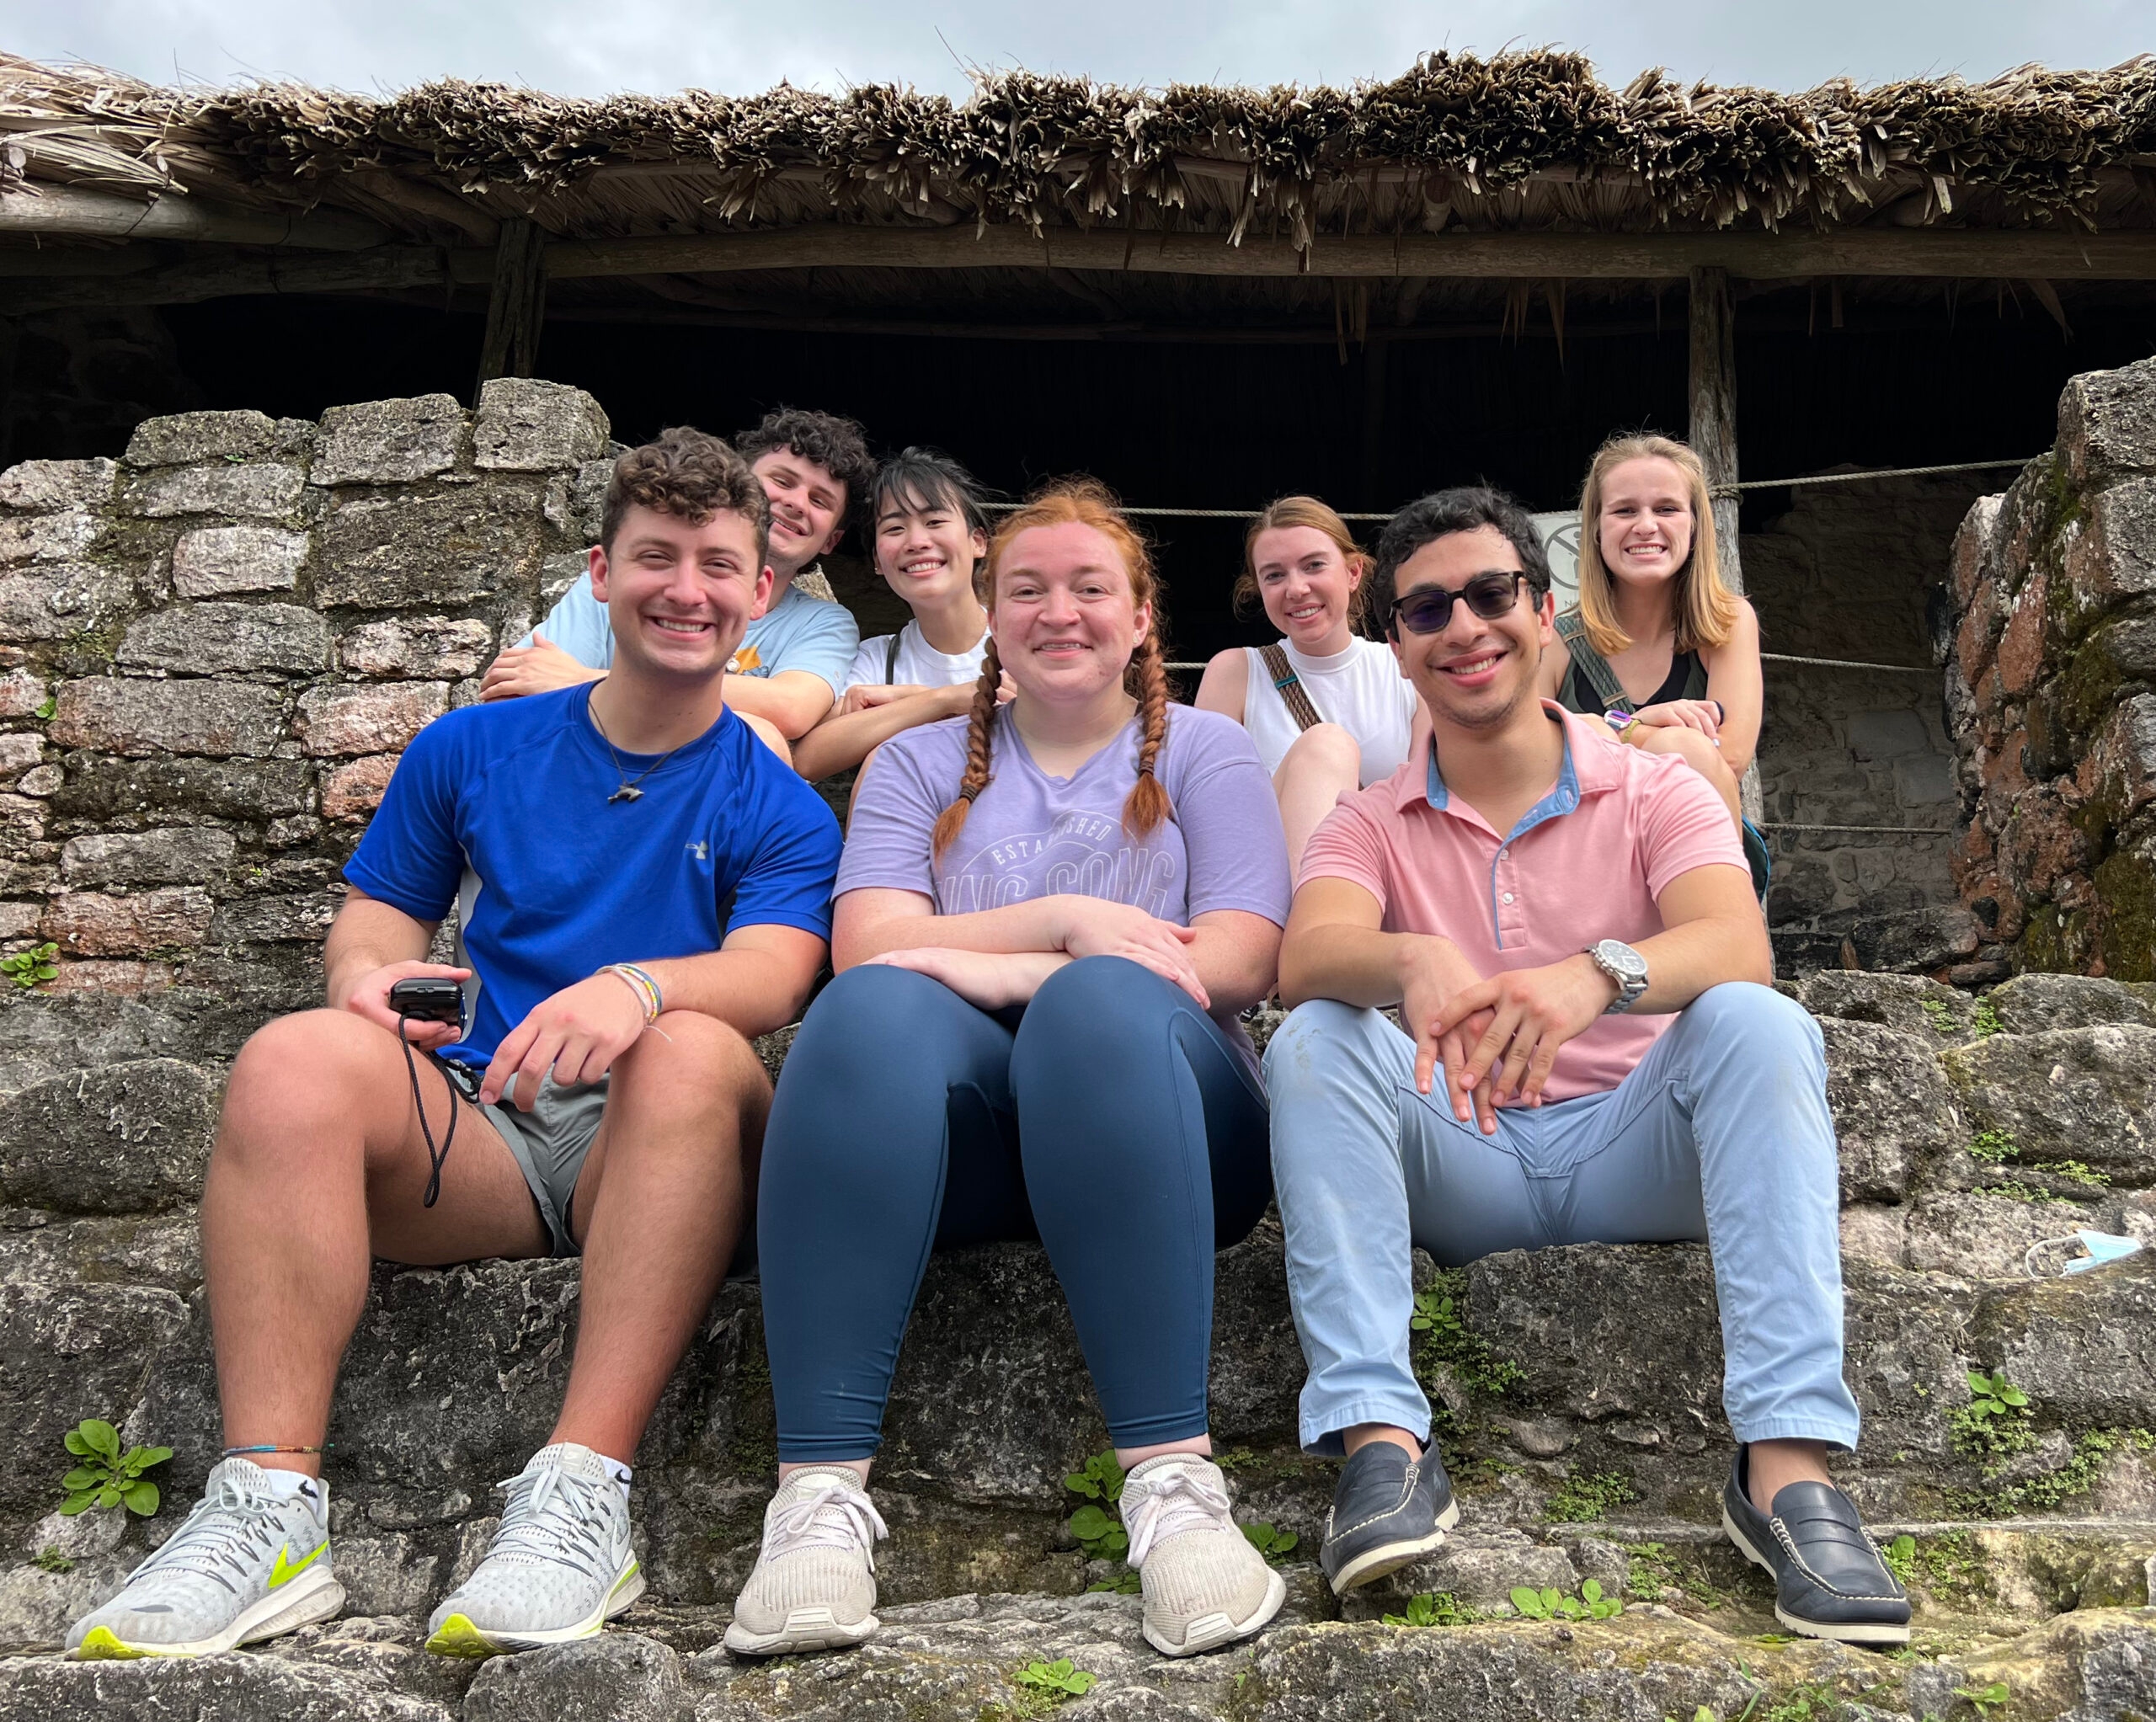 Students pose for a photo while touring the Kohunlich archaeological site in Mexico. Front row from left are Daniel Dossey, Lilyana Beebe (auditing the course) and Jared Yanez. Back row from left are Zachary Smith, Lauren Lee, Avery Clark and Rebekah Curry.